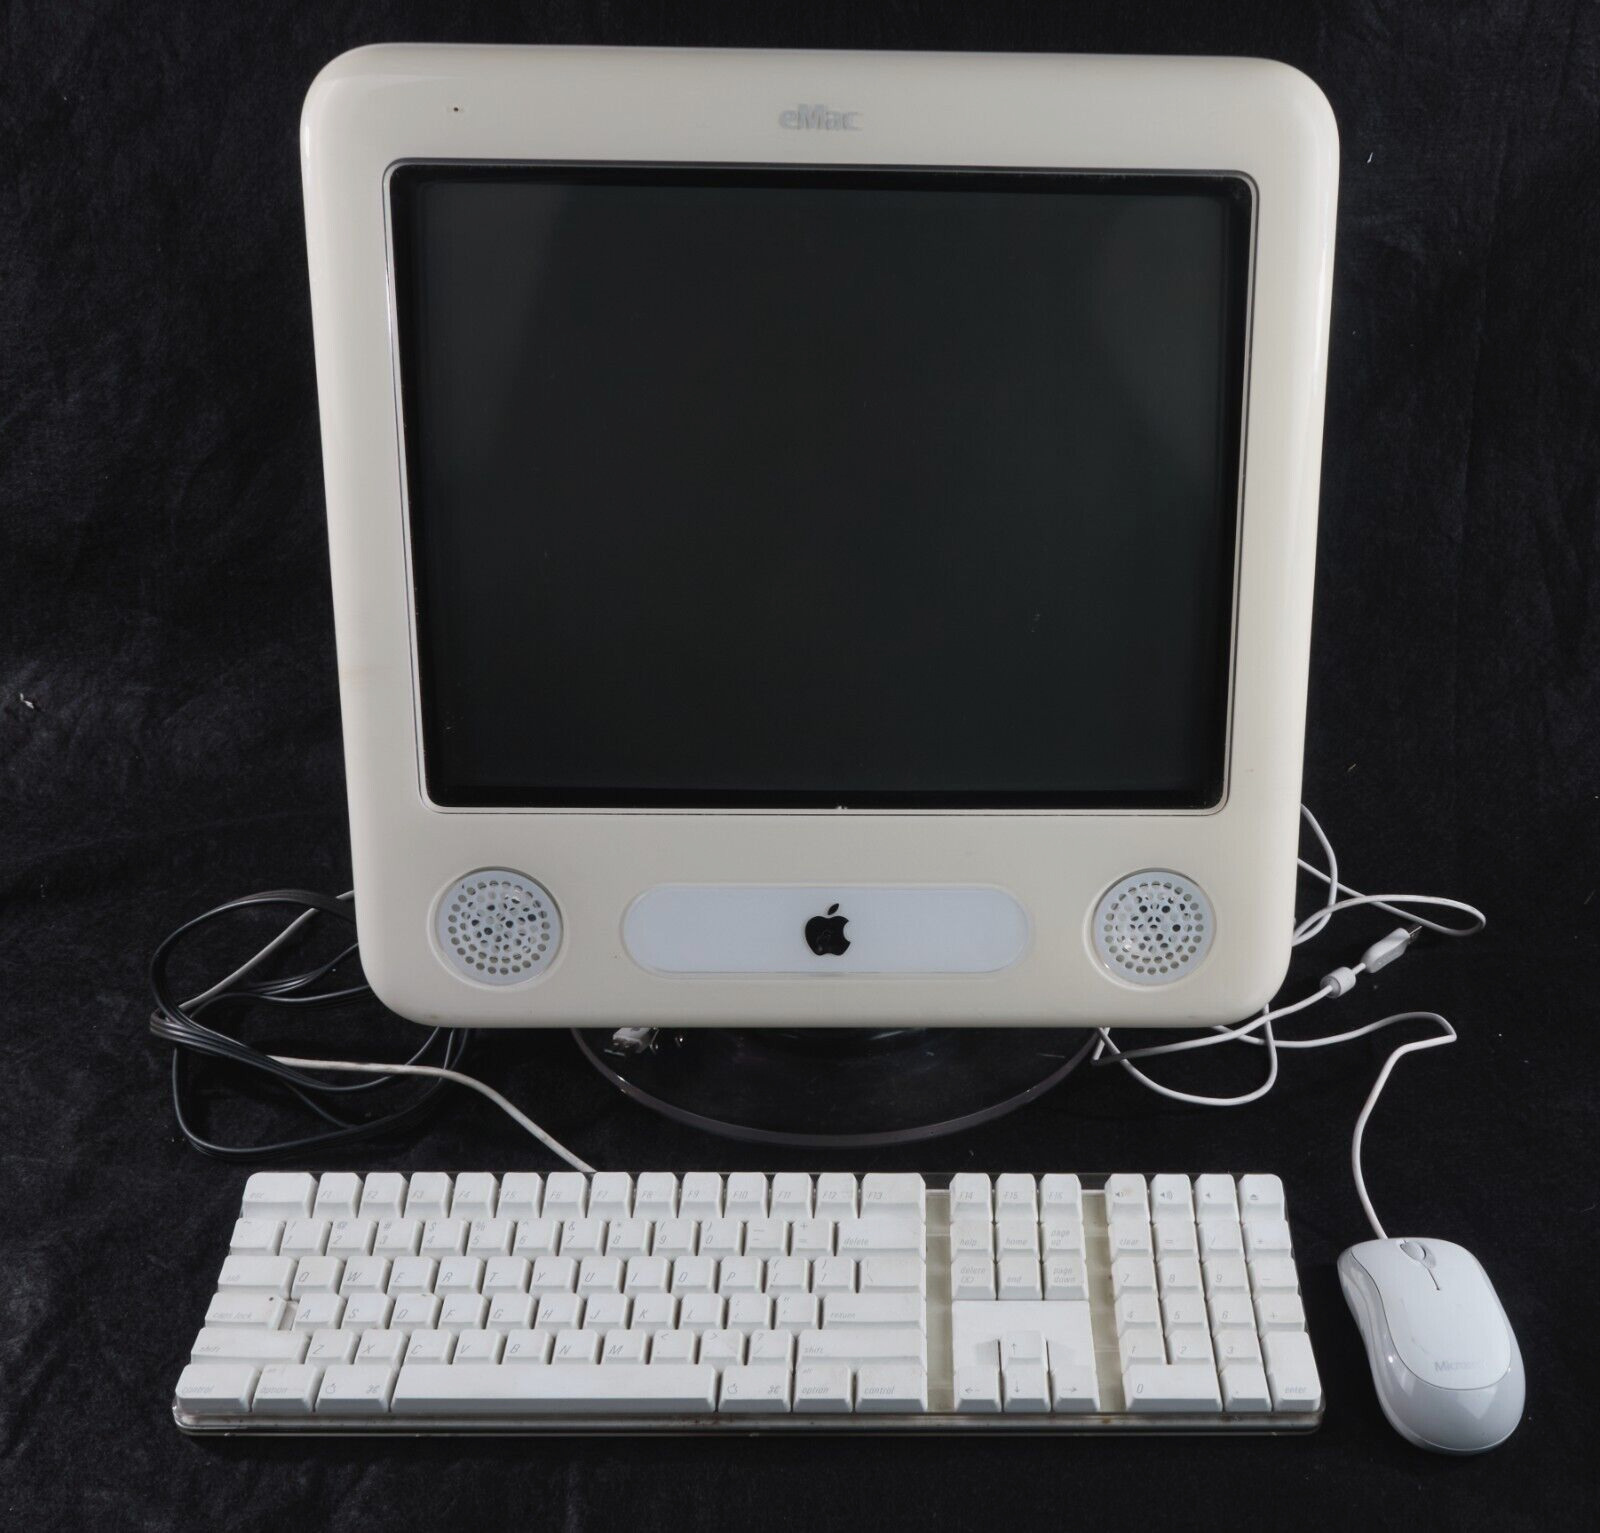 Vintage Apple eMac A1002 PowerPC G4 with Keyboard, Mouse and Power Cable Bundle